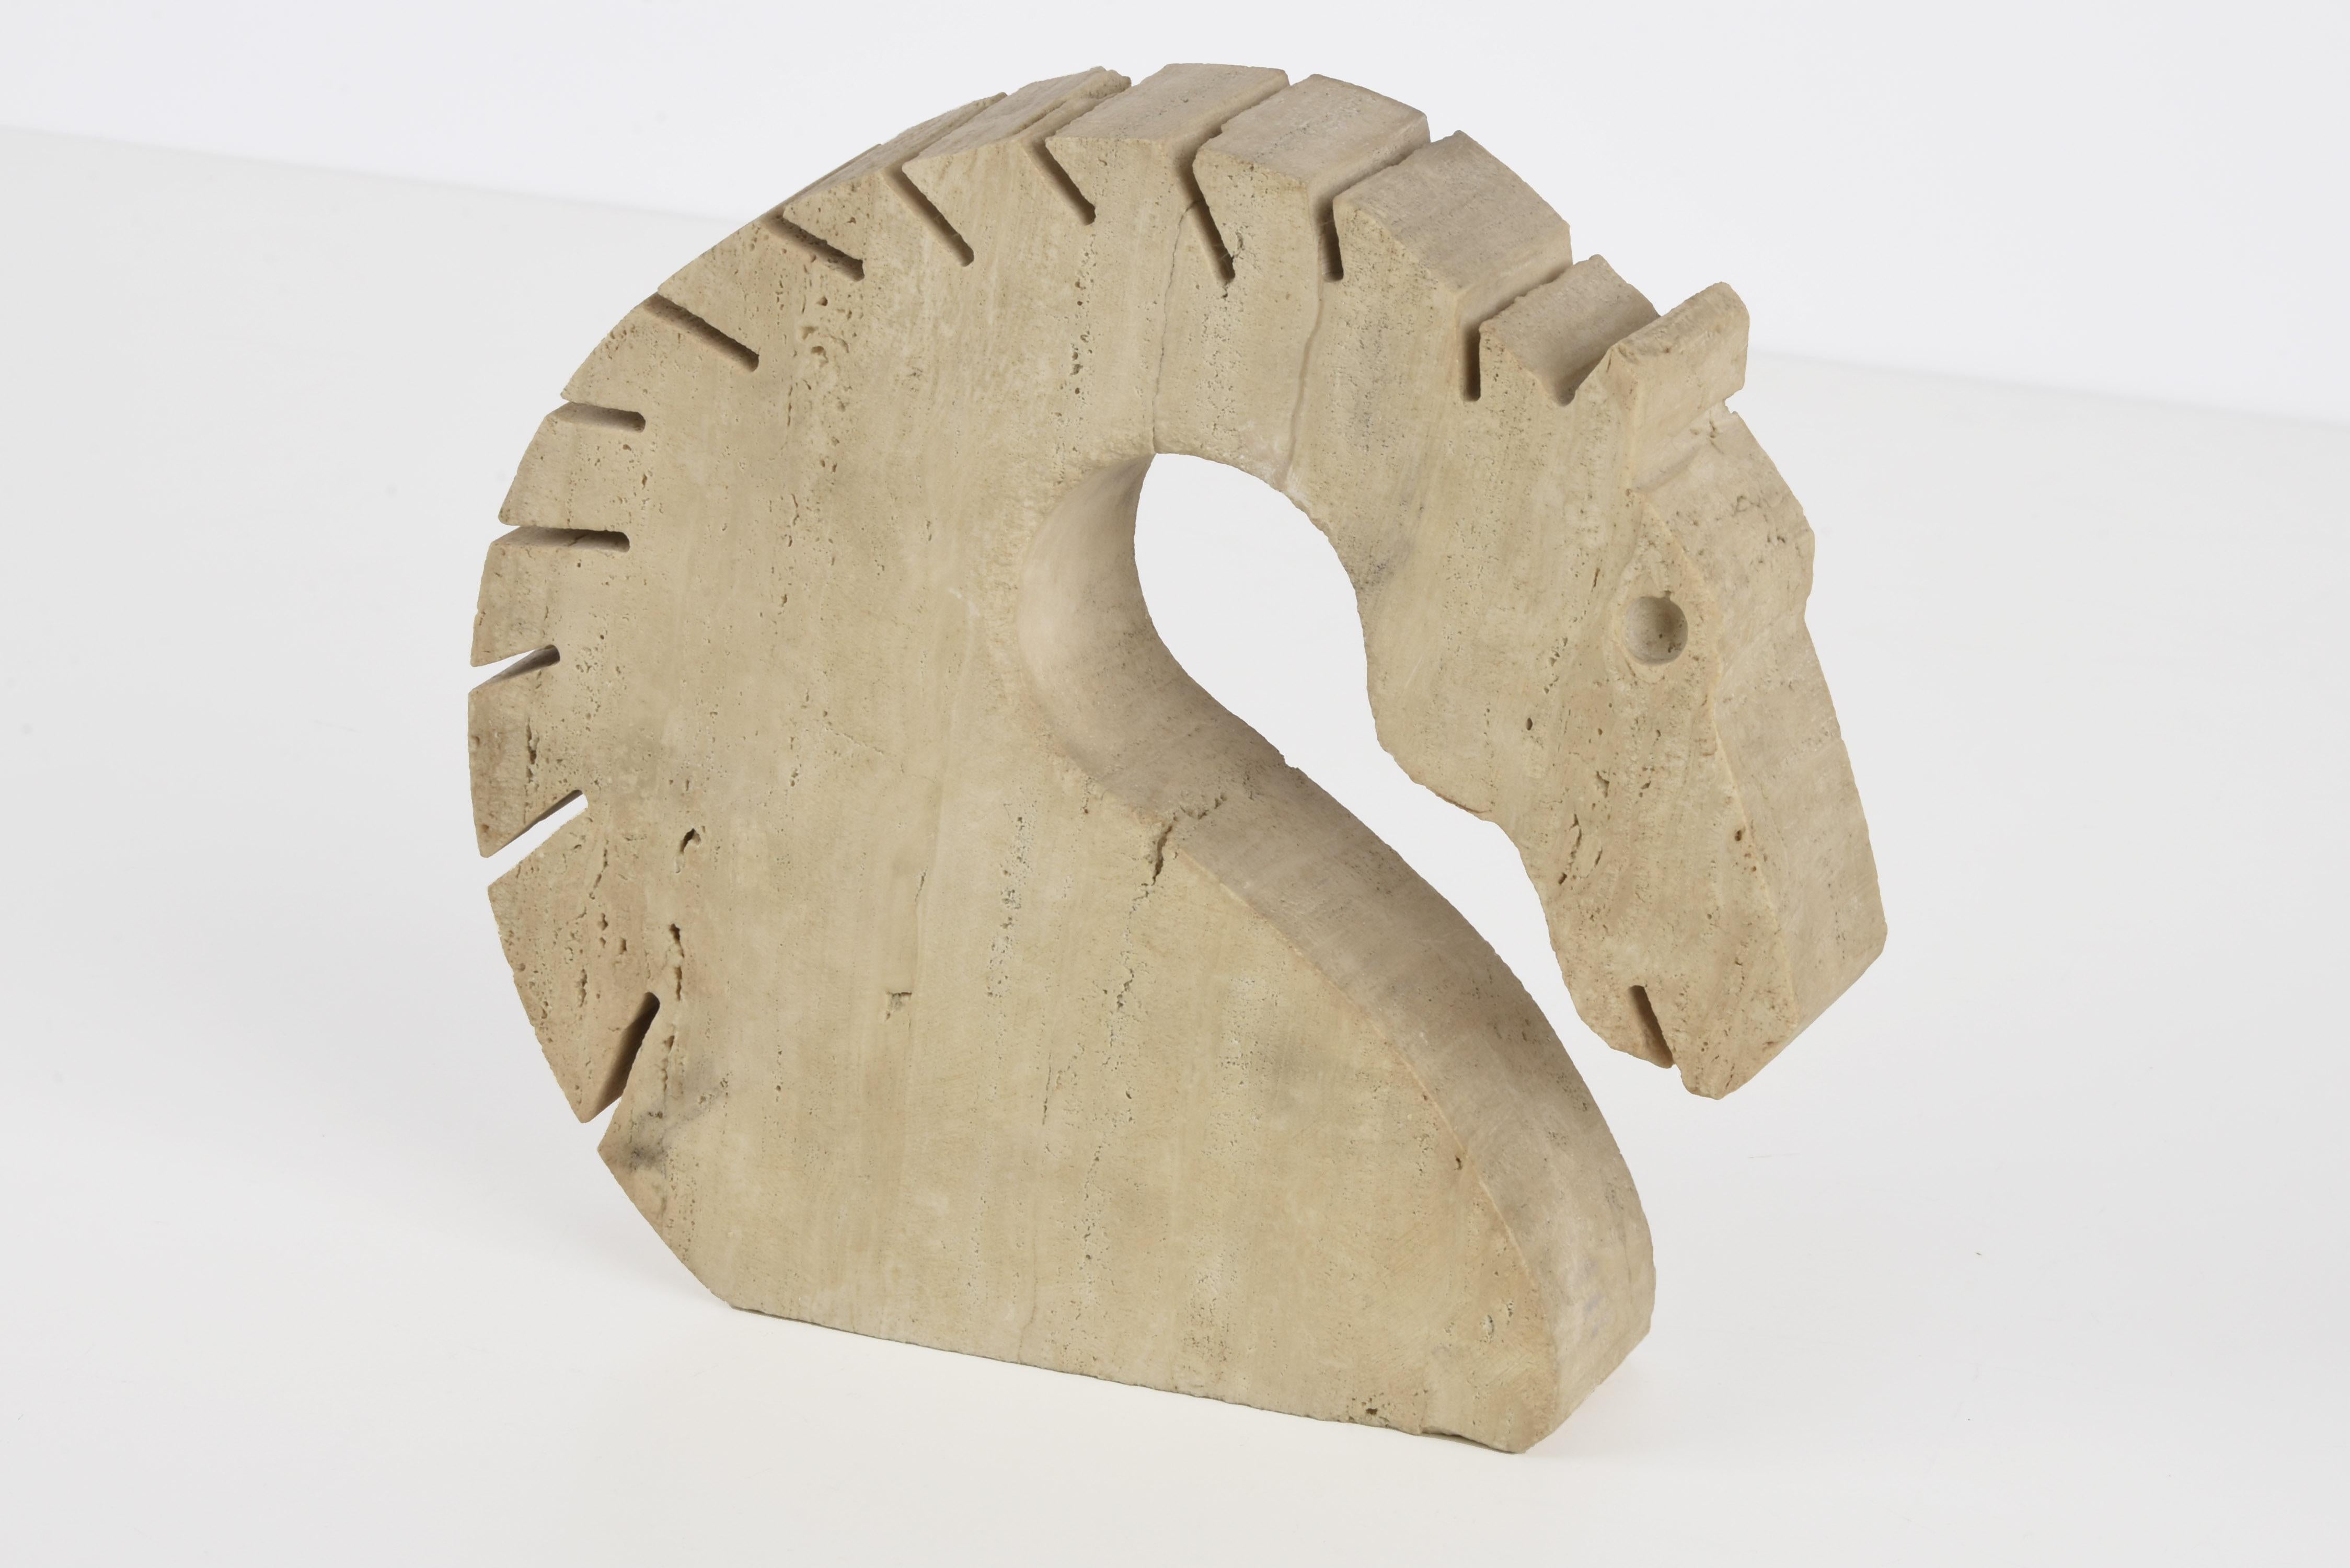 Italian Travertine Marble Horse Sculpture, Fratelli Mannelli, Italy, 1970s In Good Condition In Roma, IT